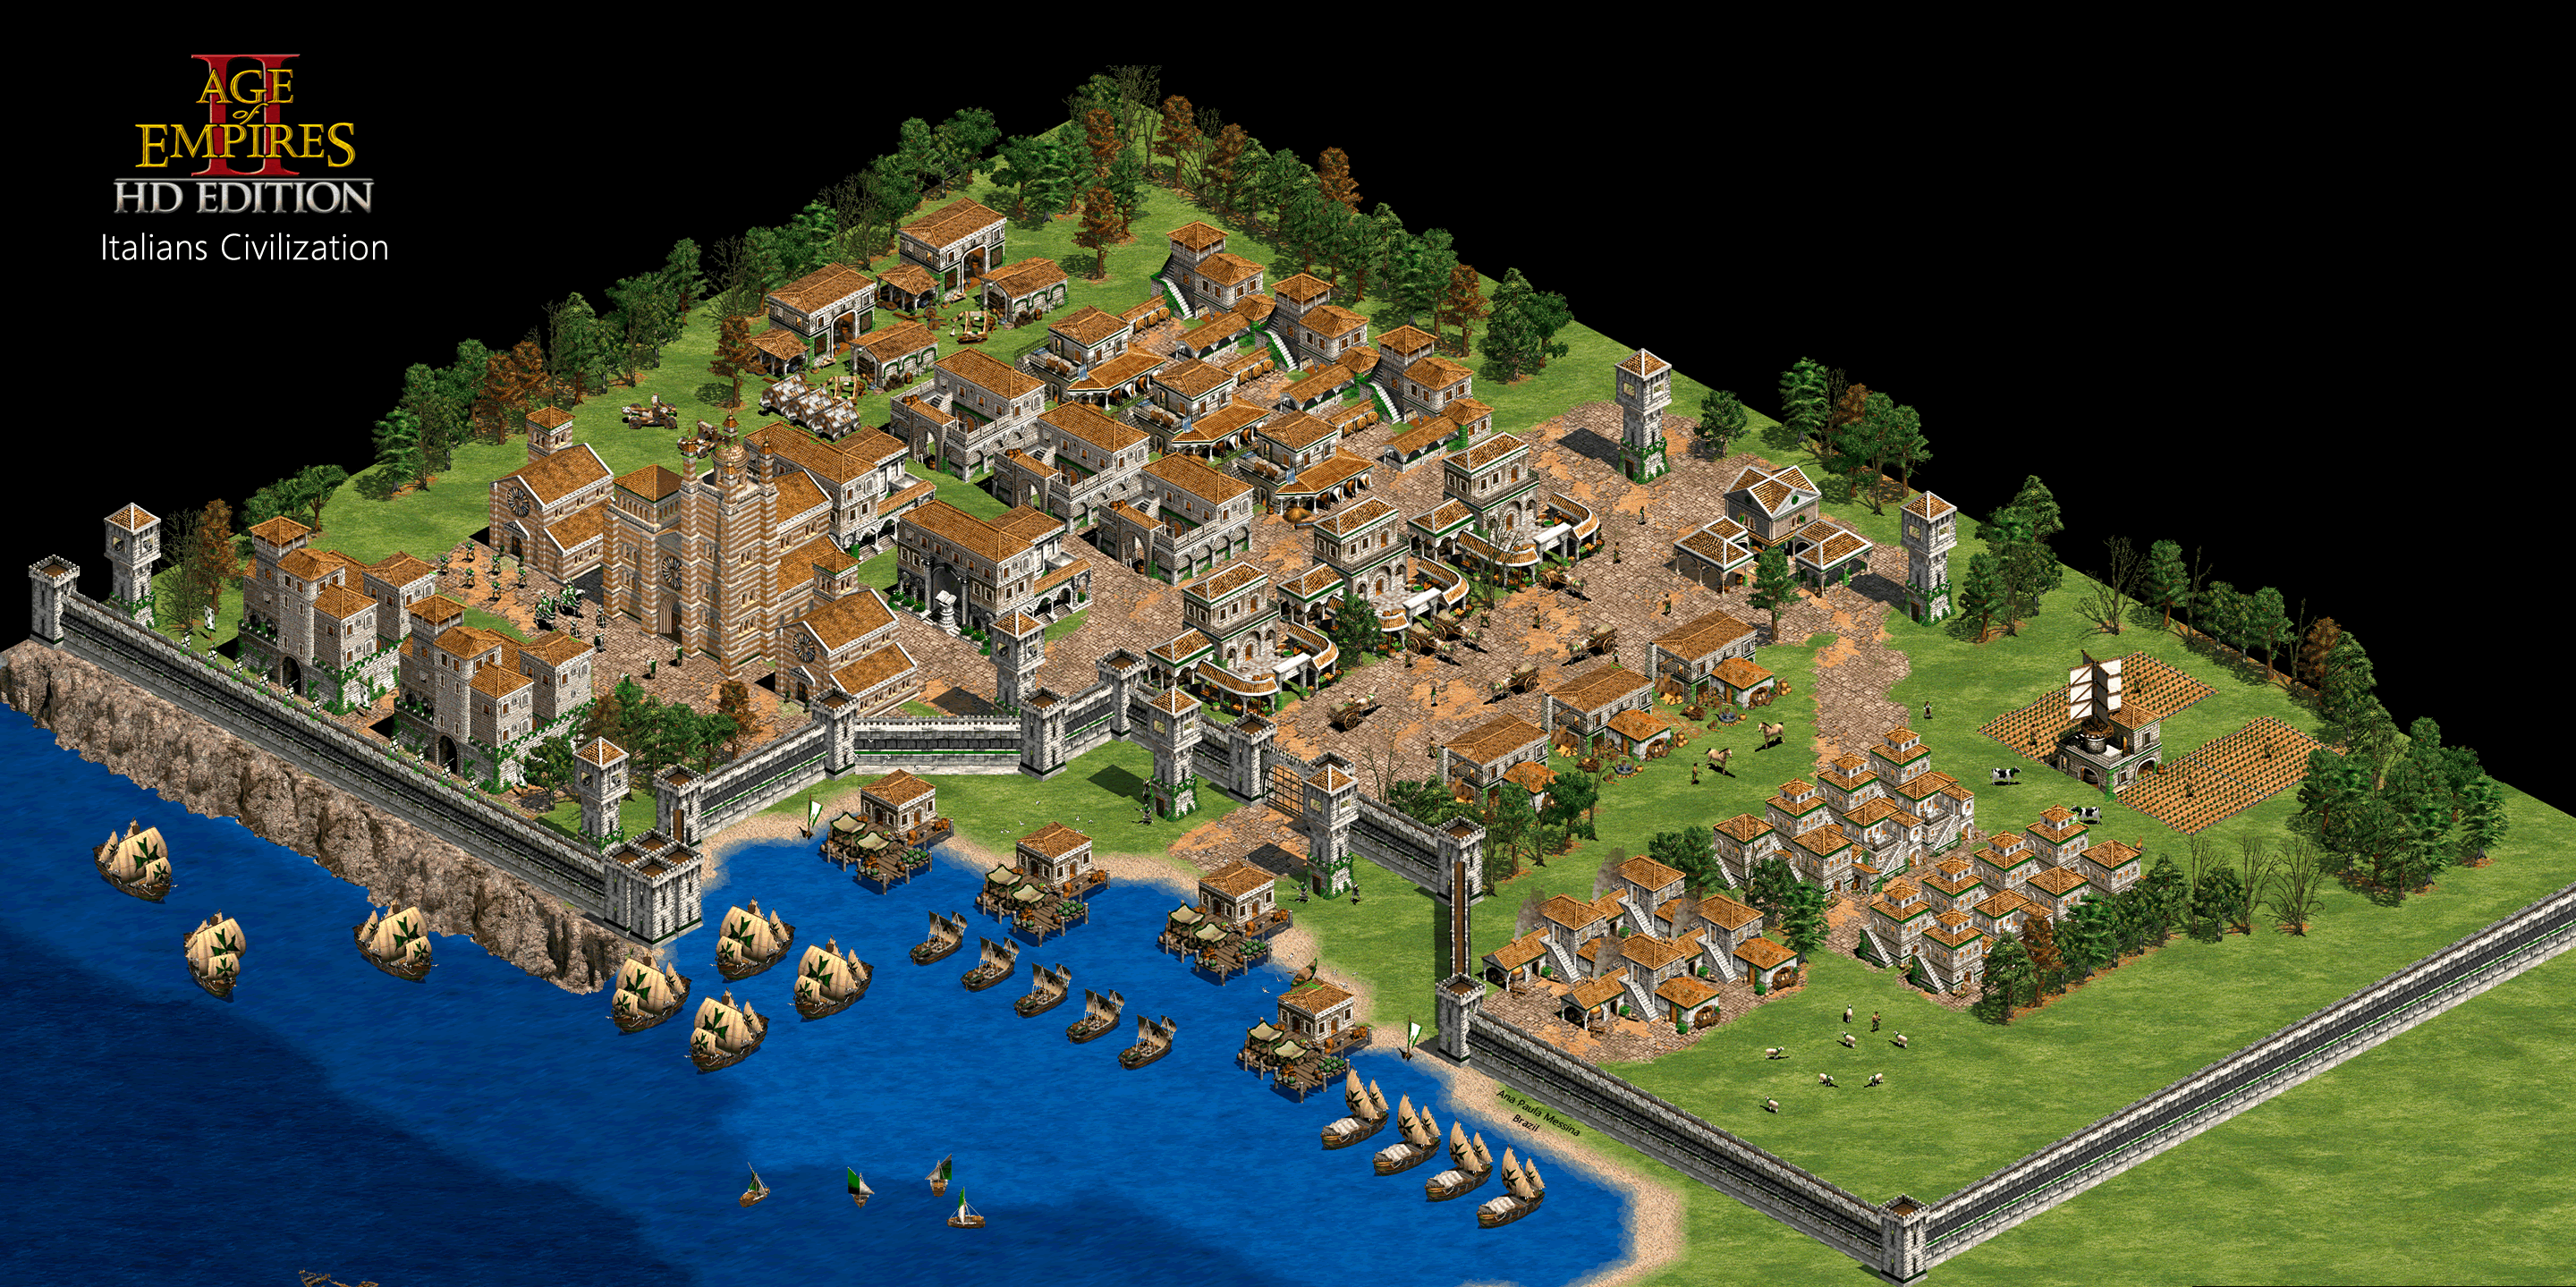 Age Of Empires 2 Wallpaper Engine | Age of empires, Wallpaper, Empire